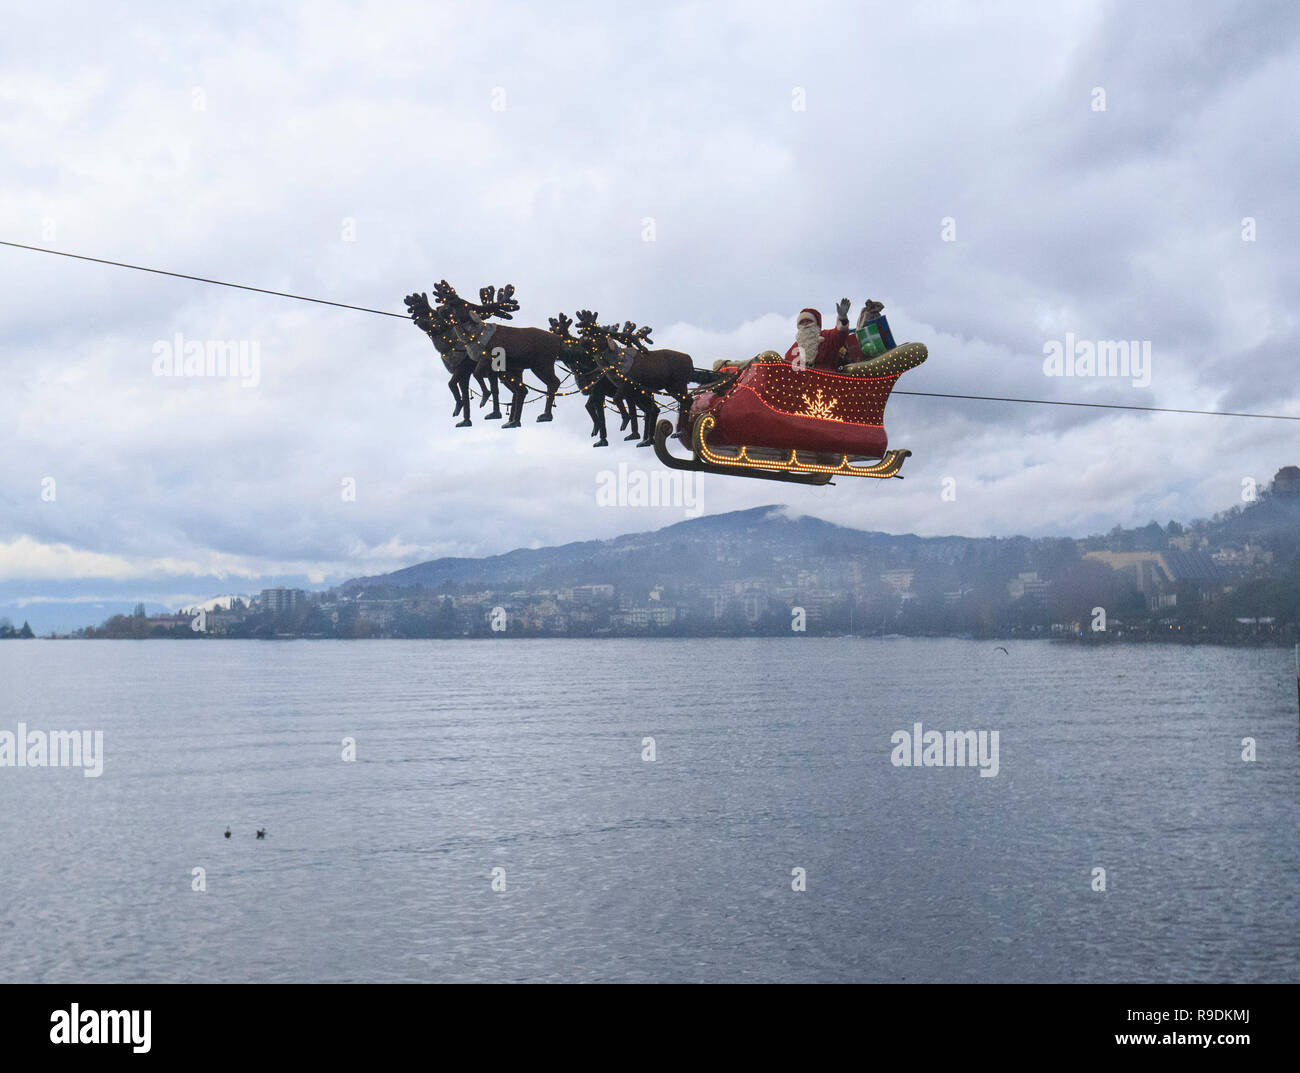 Montreux, Switzerland. 22nd Dec, 2018. A 'Santa Claus' waves to the crowd from his flying sleigh drawn by 'reindeers' over Lake Leman at sunset in Montreux, Switzerland, on Dec. 22, 2018. The flying Santa Claus stunt show is part of promotional activities by the Christmas market in Montreux, which is one of the most famous and biggest markets of its kind in Switzerland. Credit: Xu Jinquan/Xinhua/Alamy Live News Stock Photo